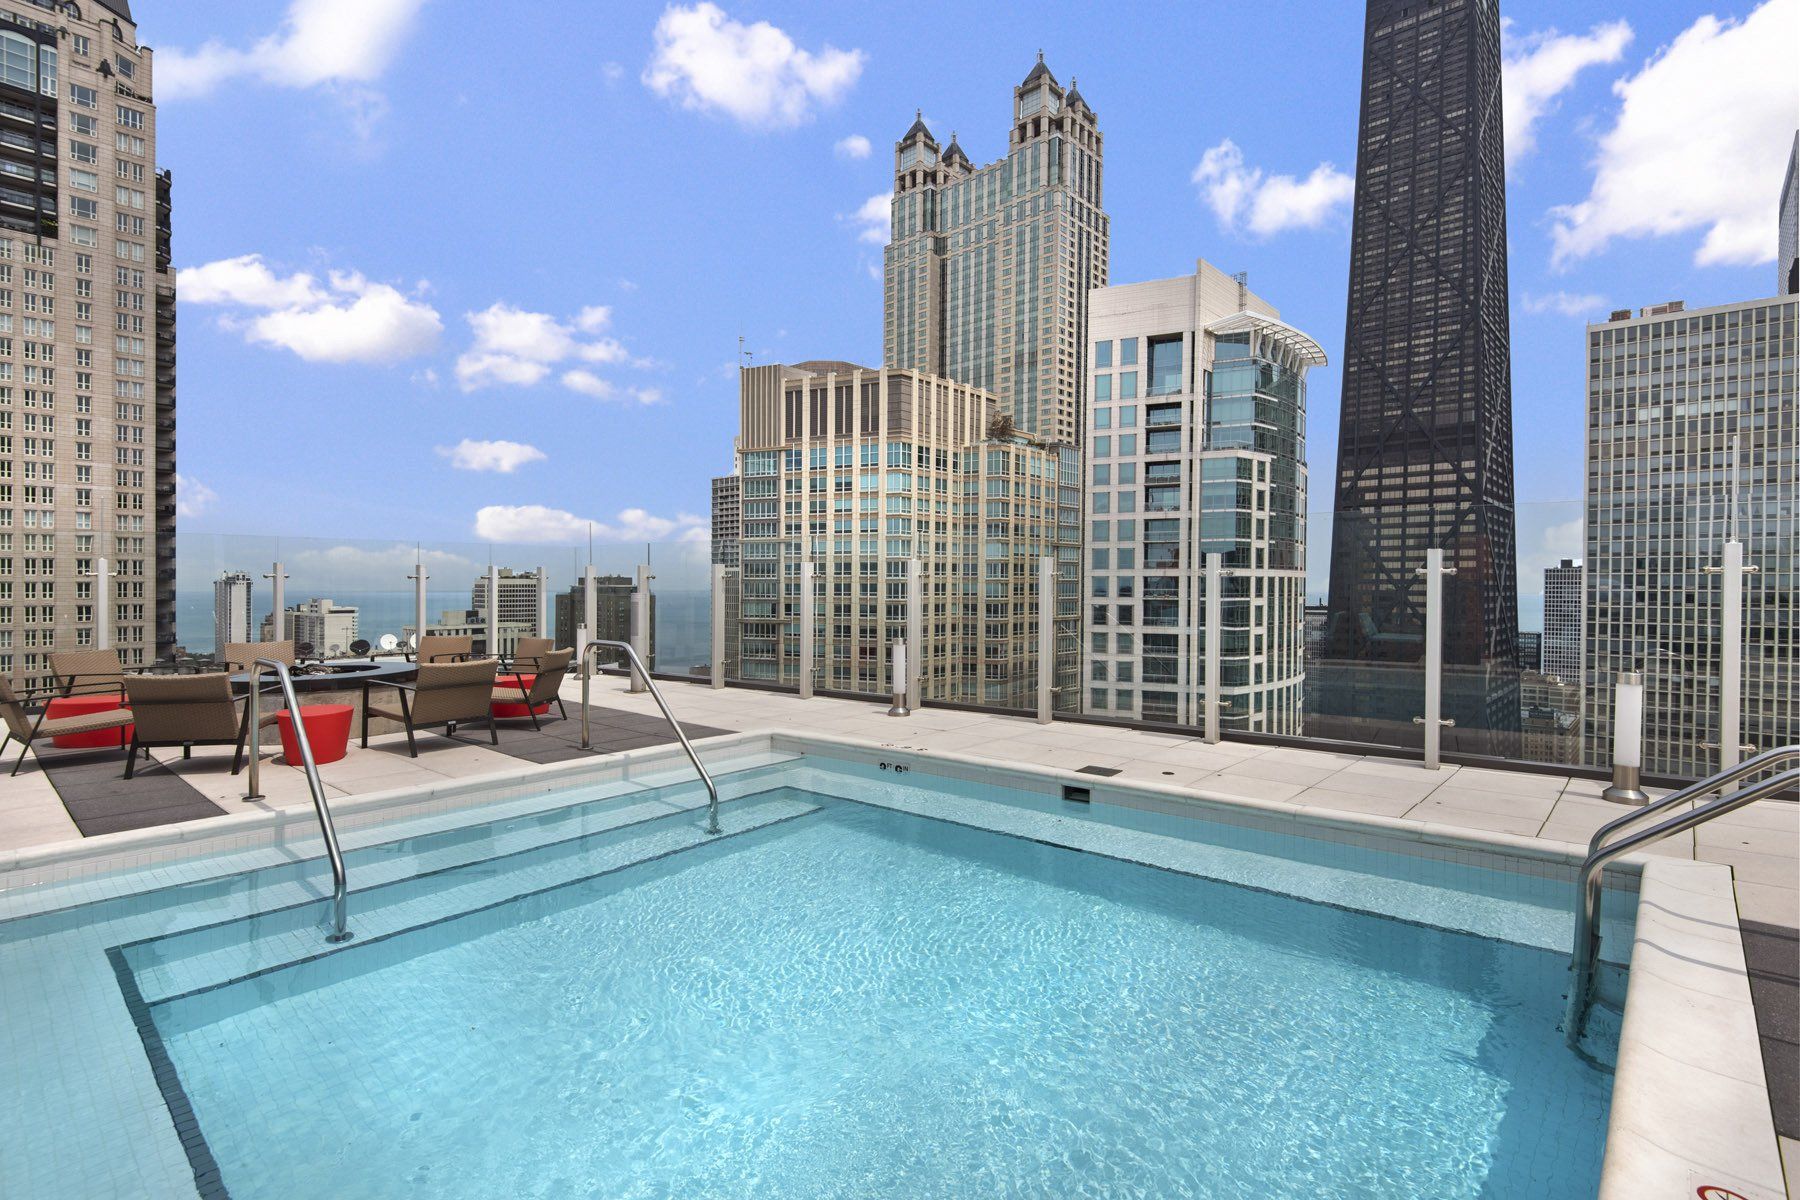 A large swimming pool with a view of a city skyline at State & Chestnut.